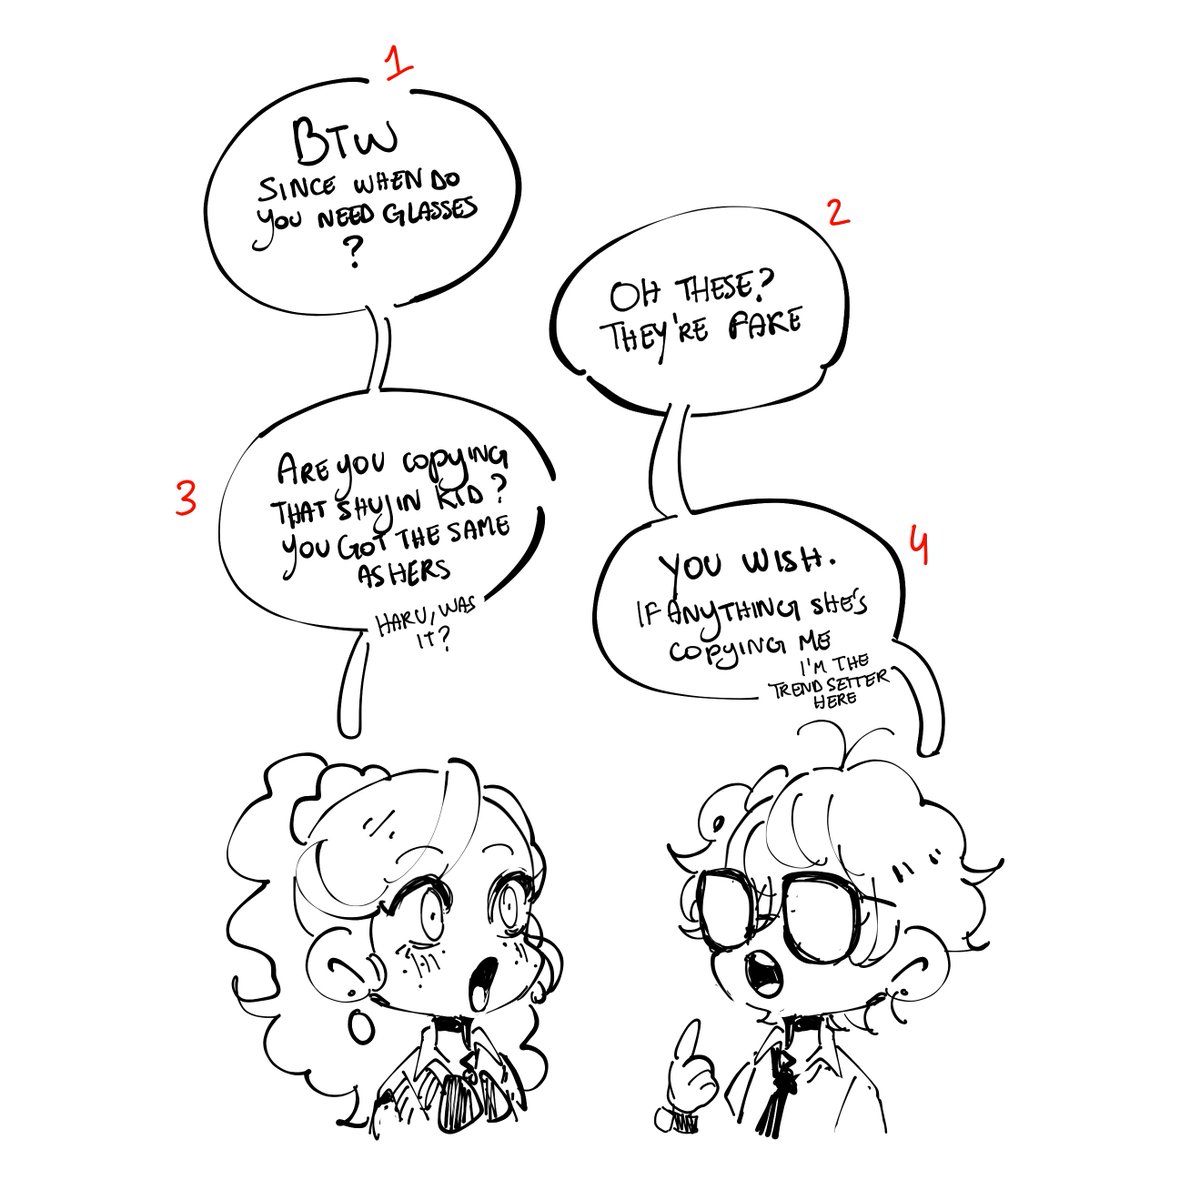 celebrity kids doing celebrity stuff (hating their lives)
swap AU ann and joker (akira here) i like to think theyre pretty close 